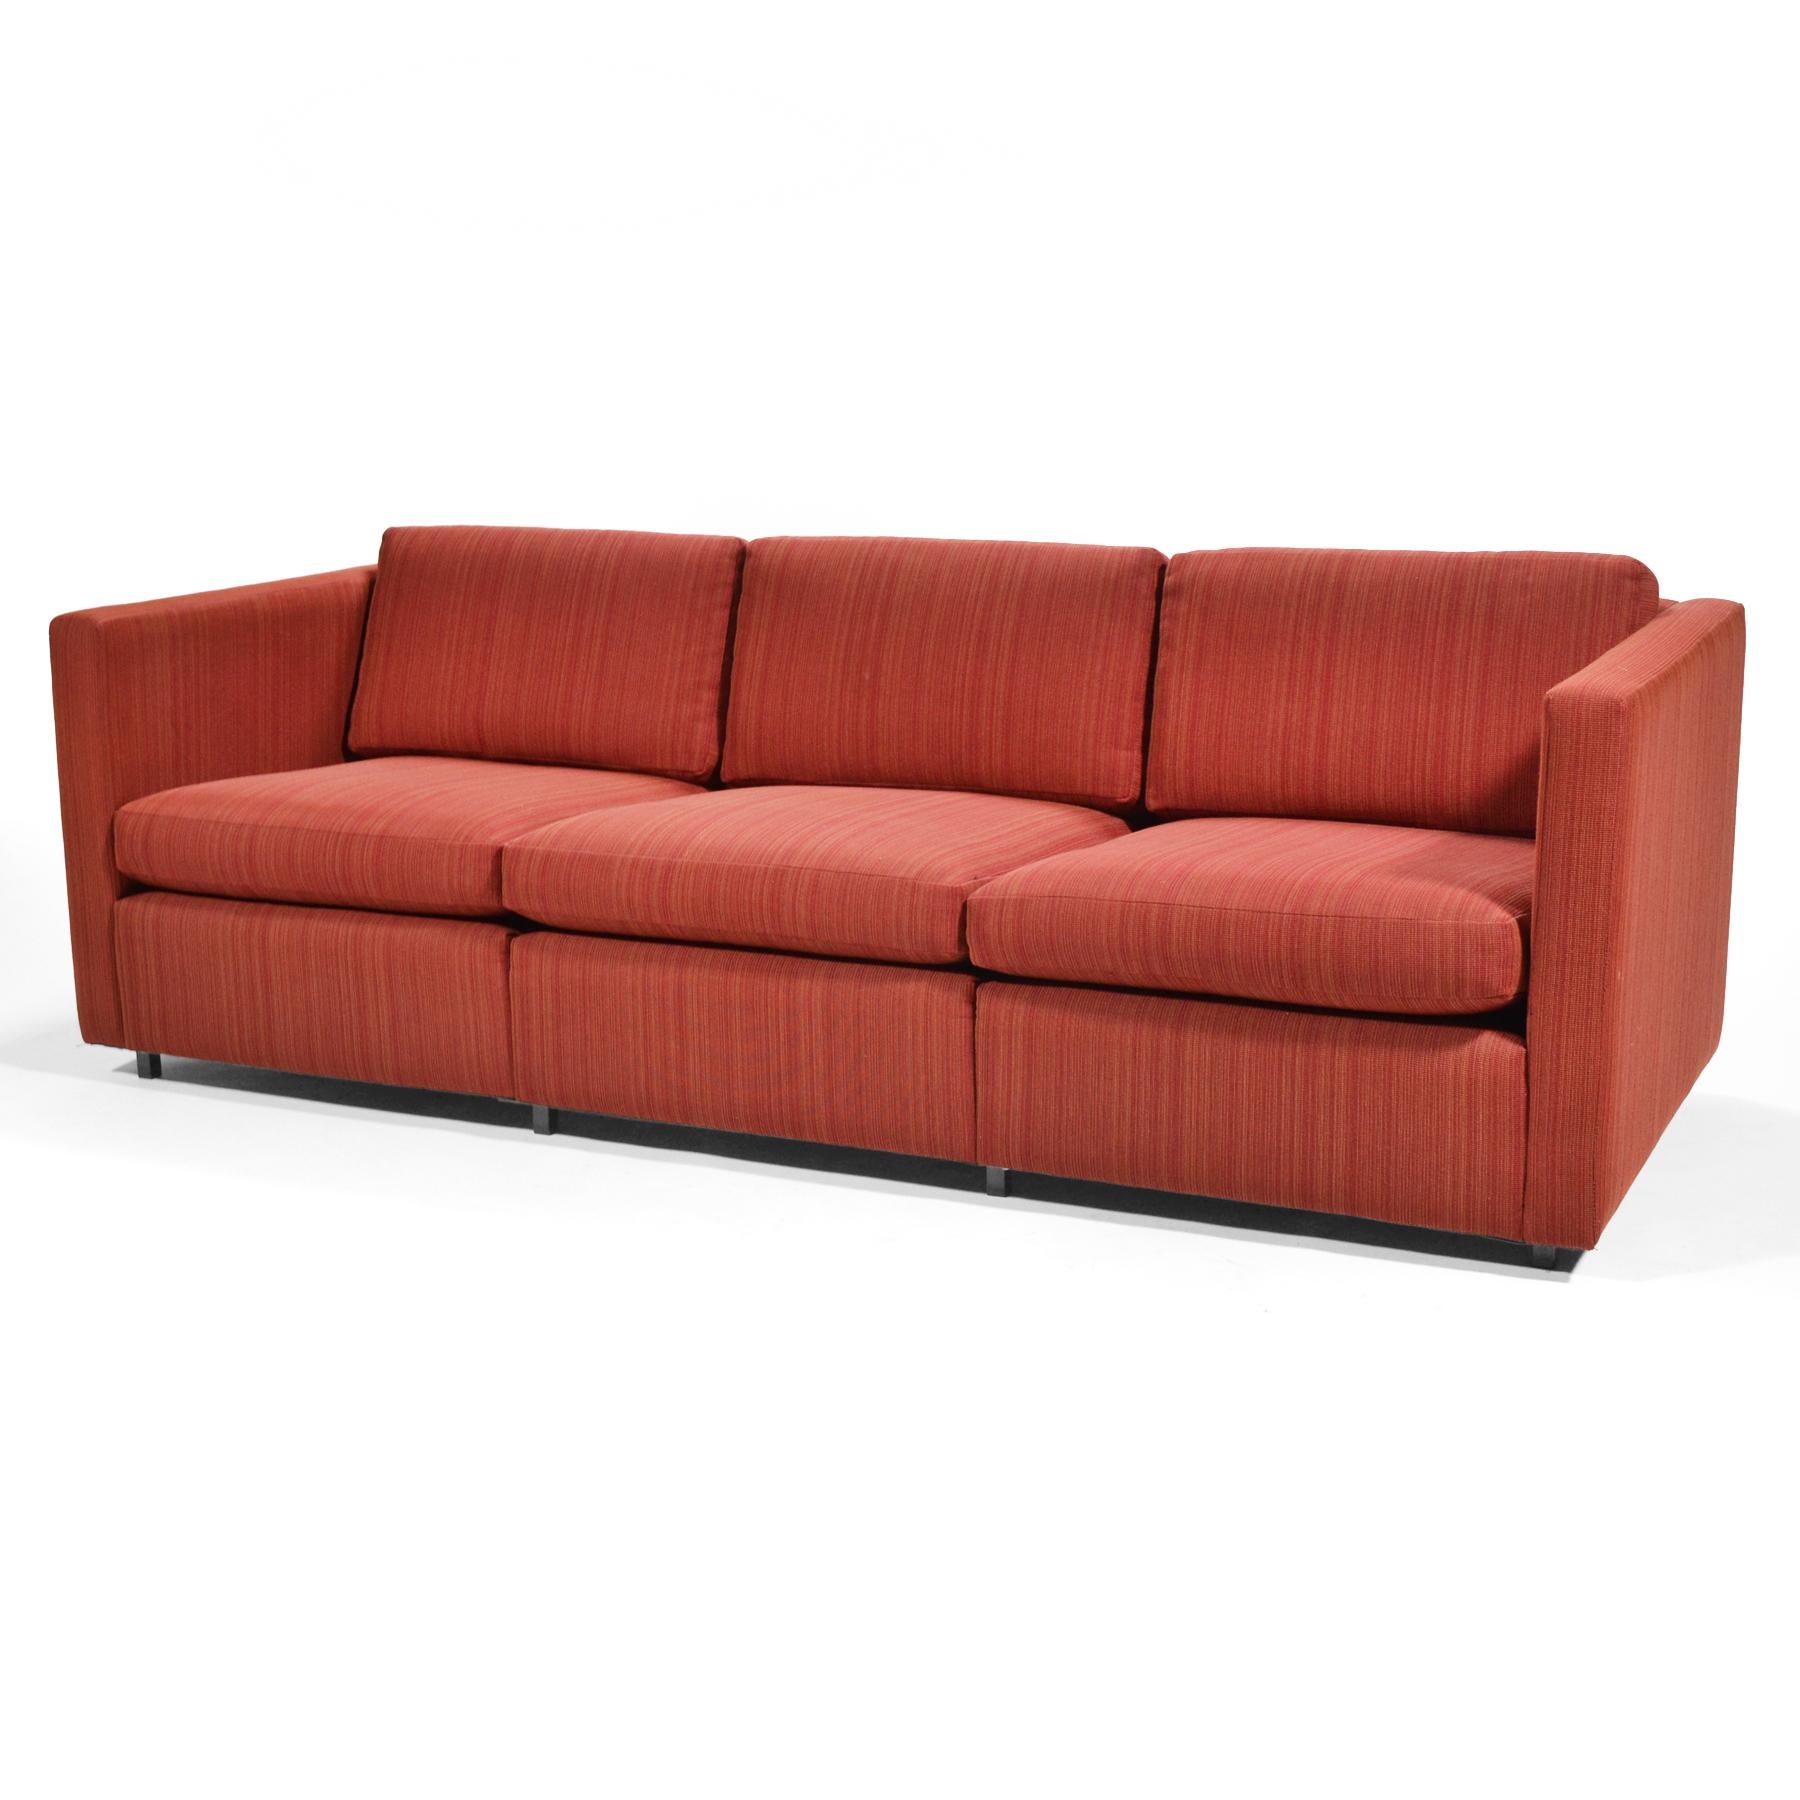 Pfister's clean-lined design is a subtle, understated design that works beautifully in almost any interior. We particularly love how the small, inset legs give the sofa a floating quality. This example is upholstered in a nicely textured brick red